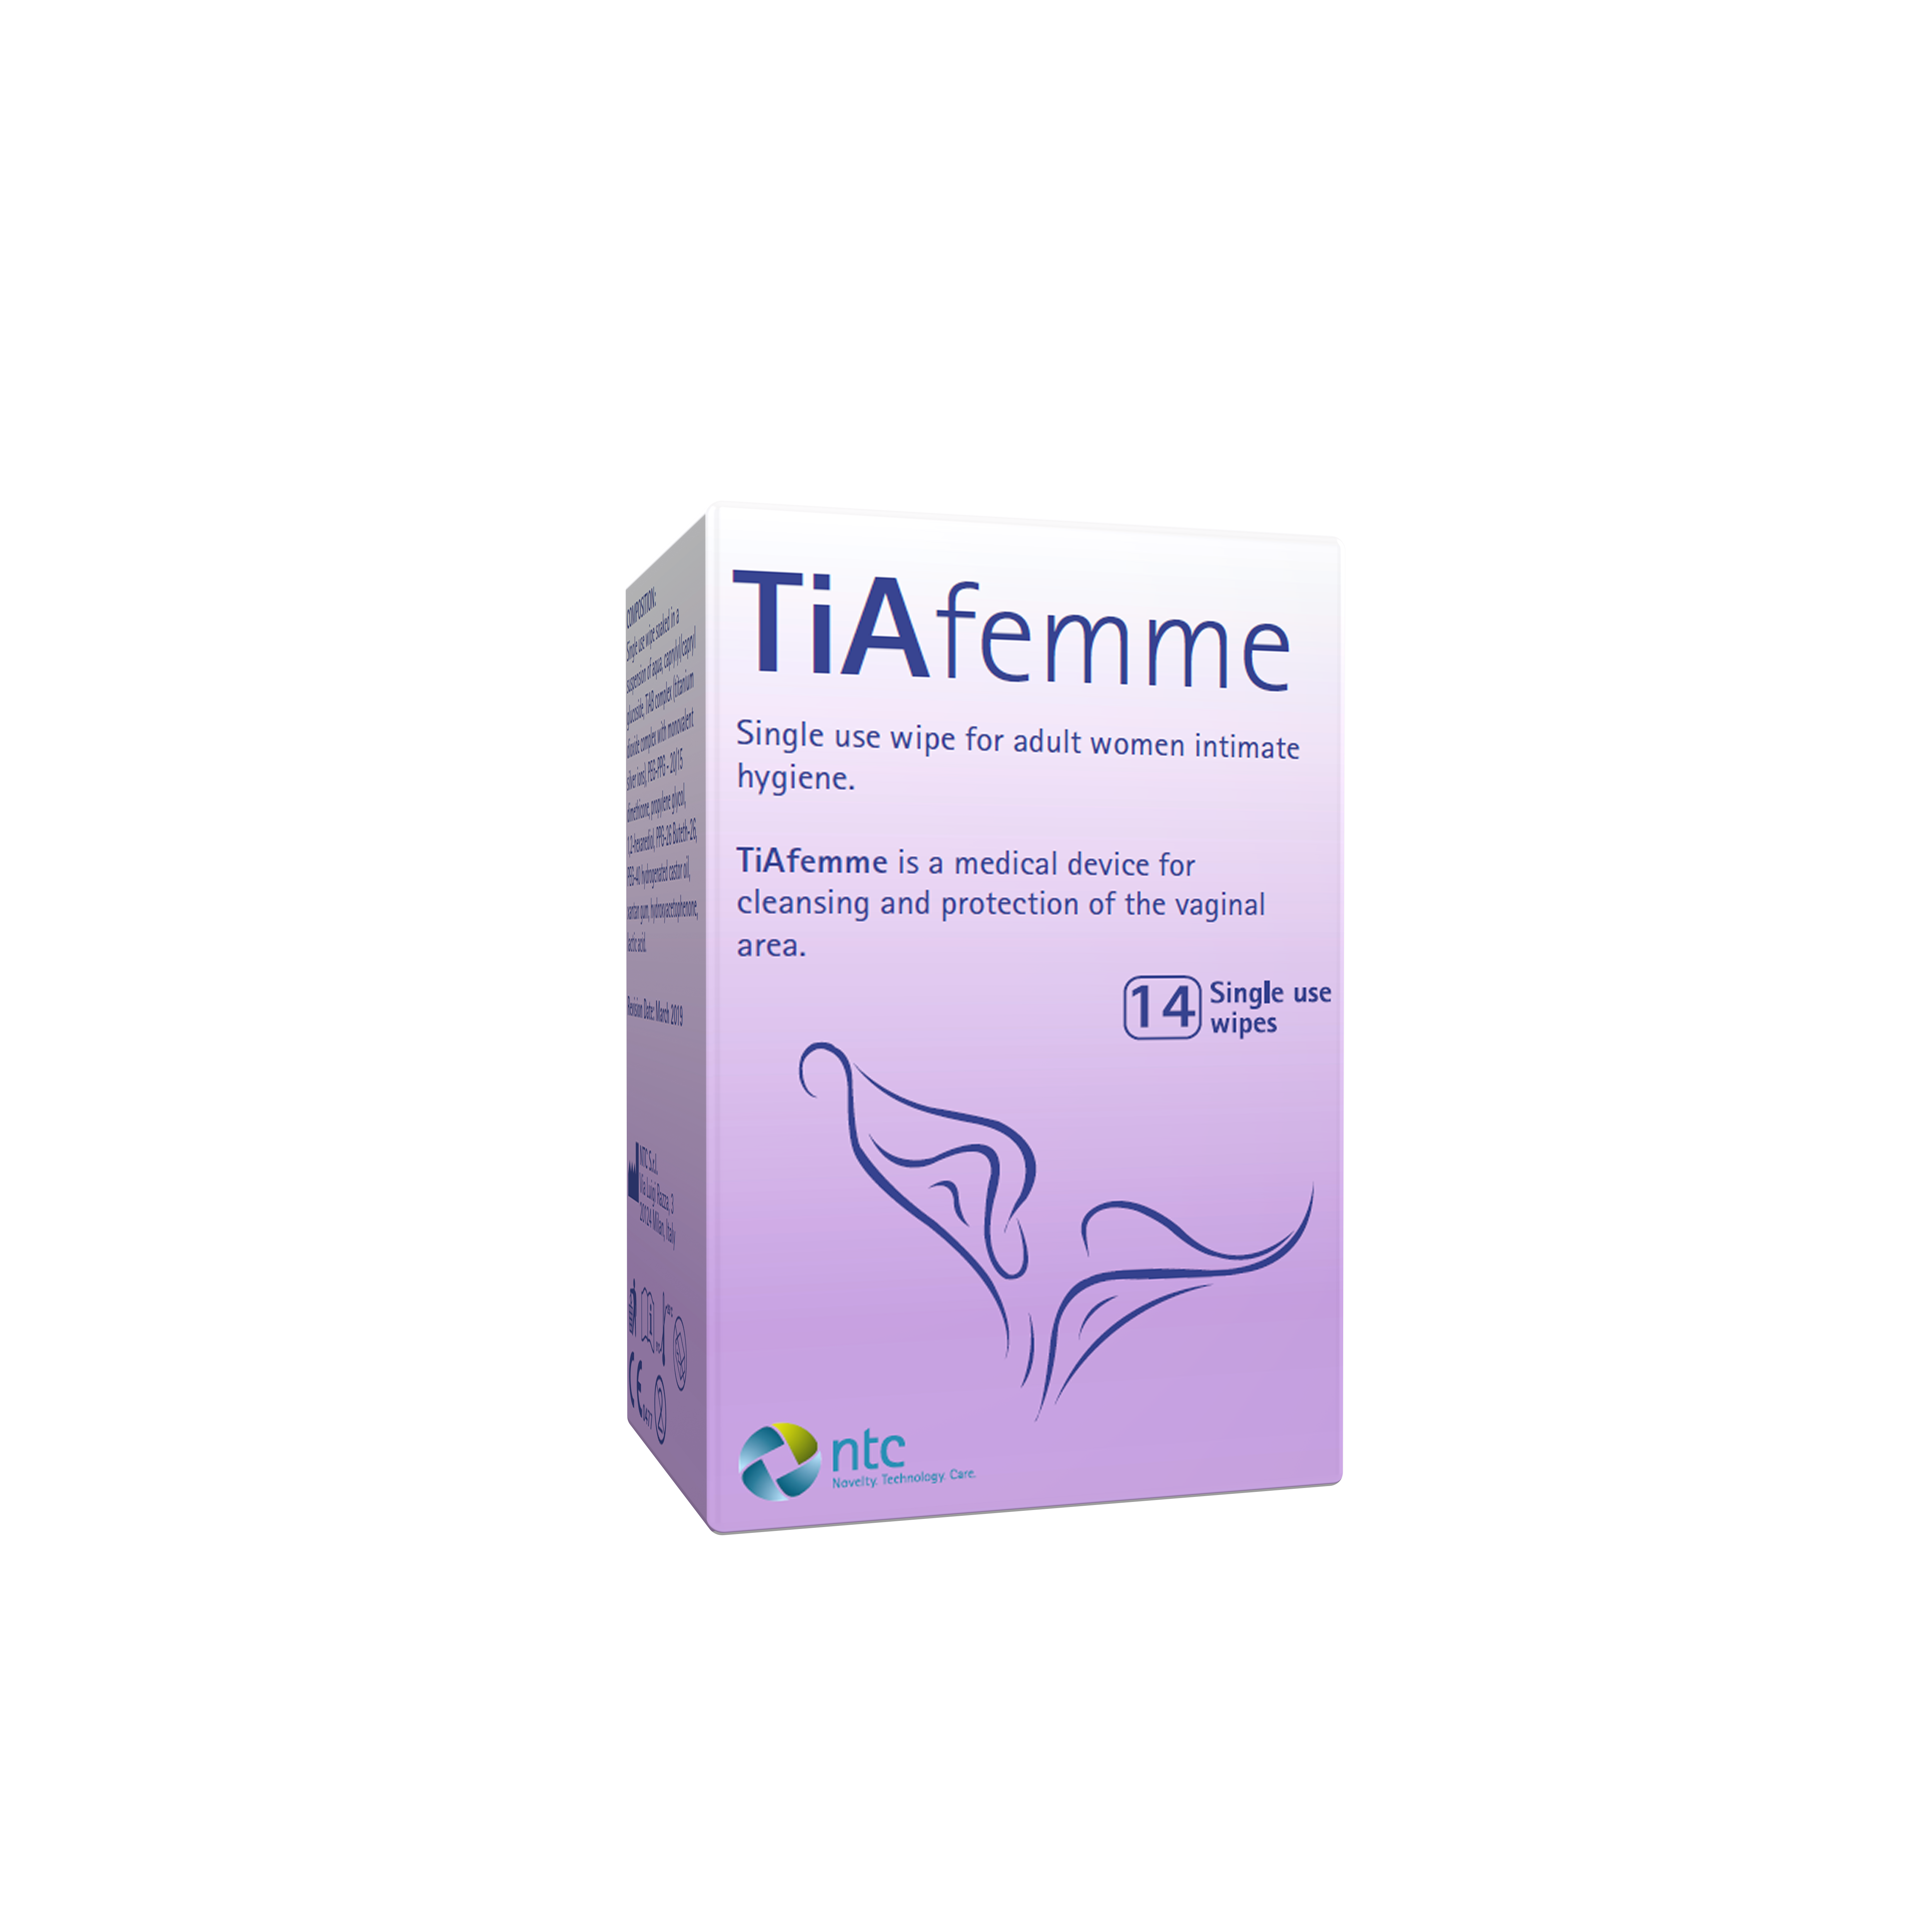 TIAFEMME - Medicated wipes for intimate hygiene (Women’s Health - Gynecology)